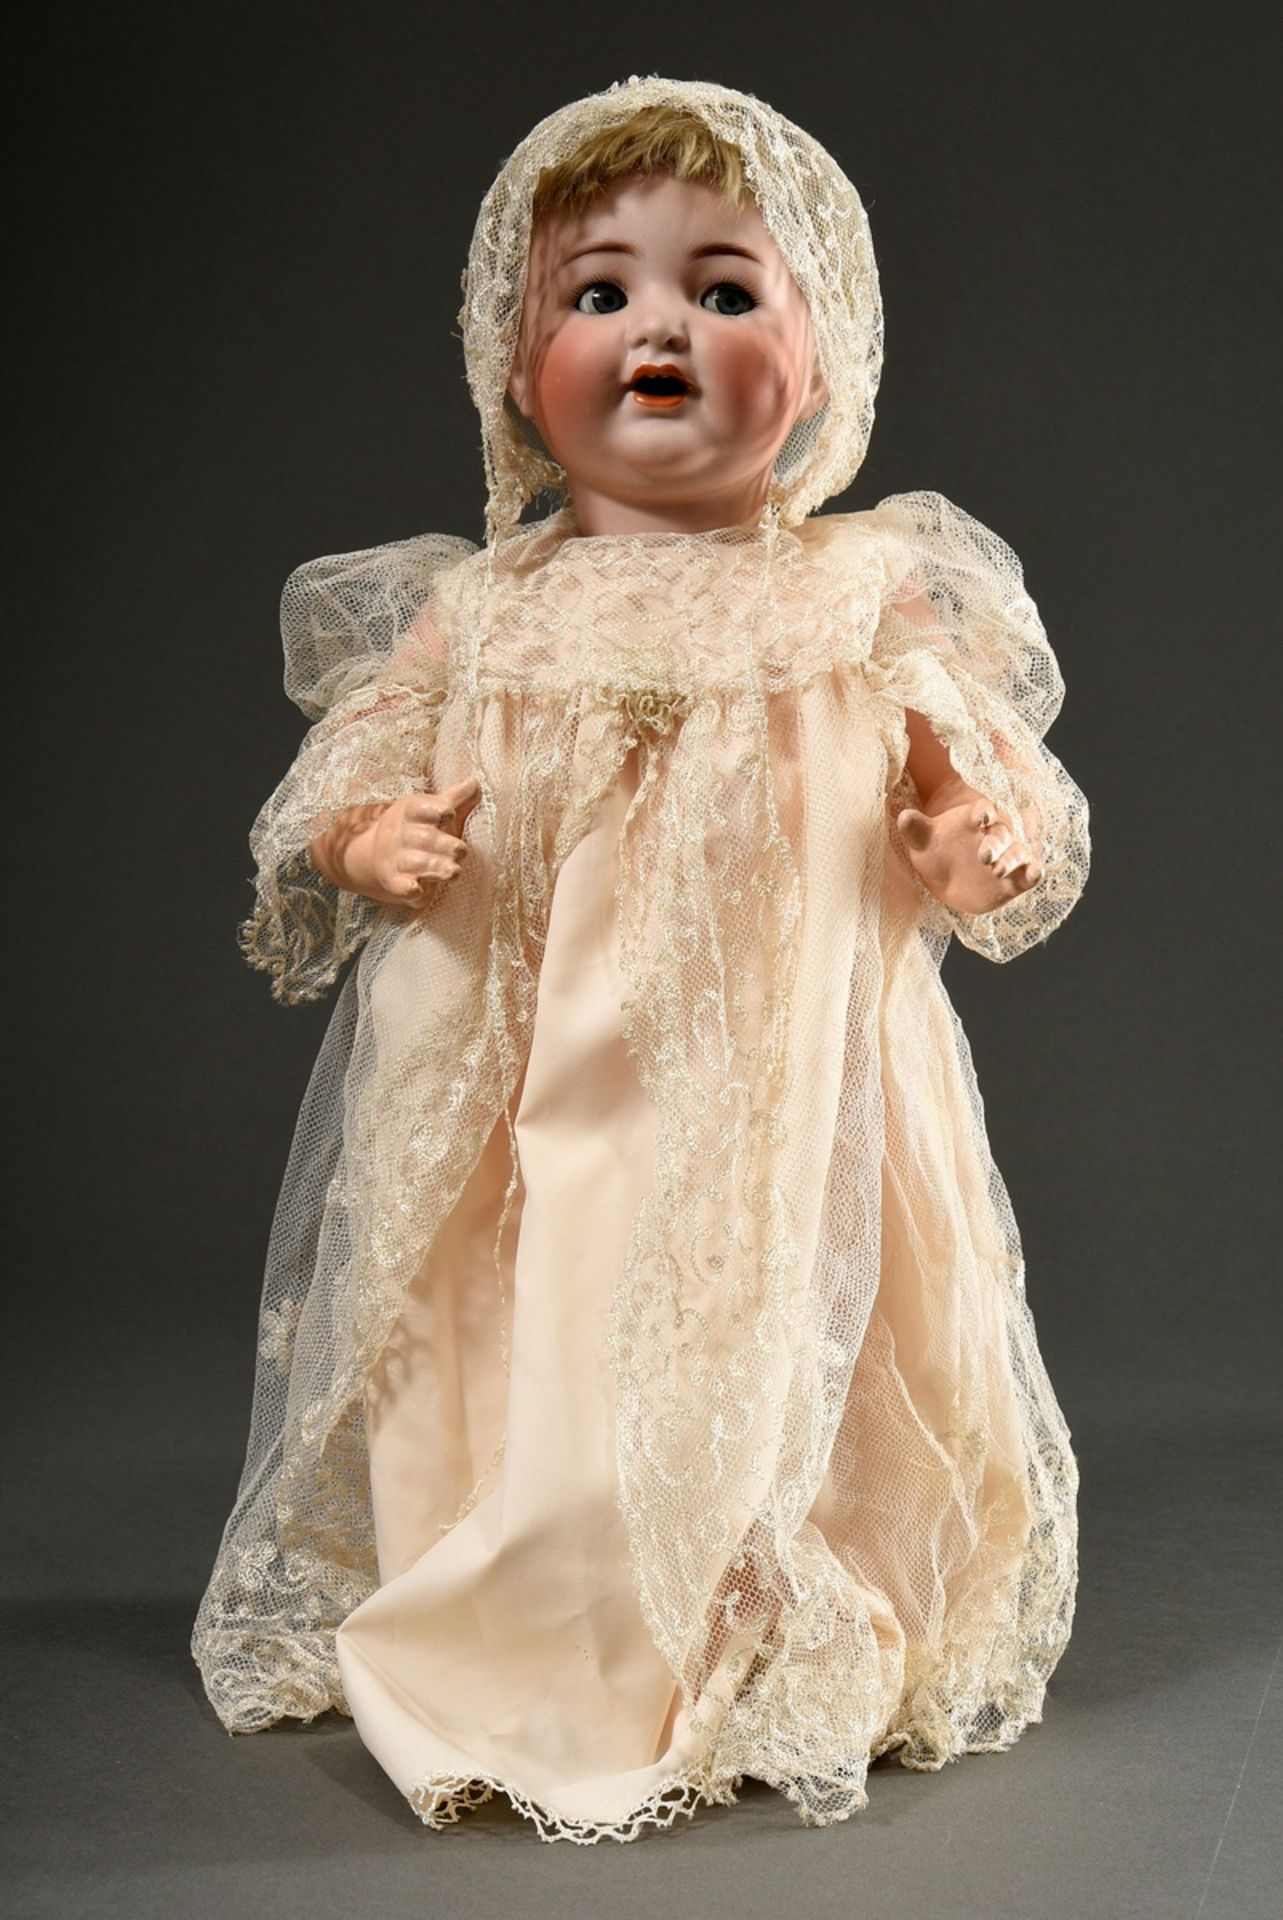 Kämmerer & Reinhardt doll with bisque porcelain crank head, blue sleeping eyes, open mouth with two